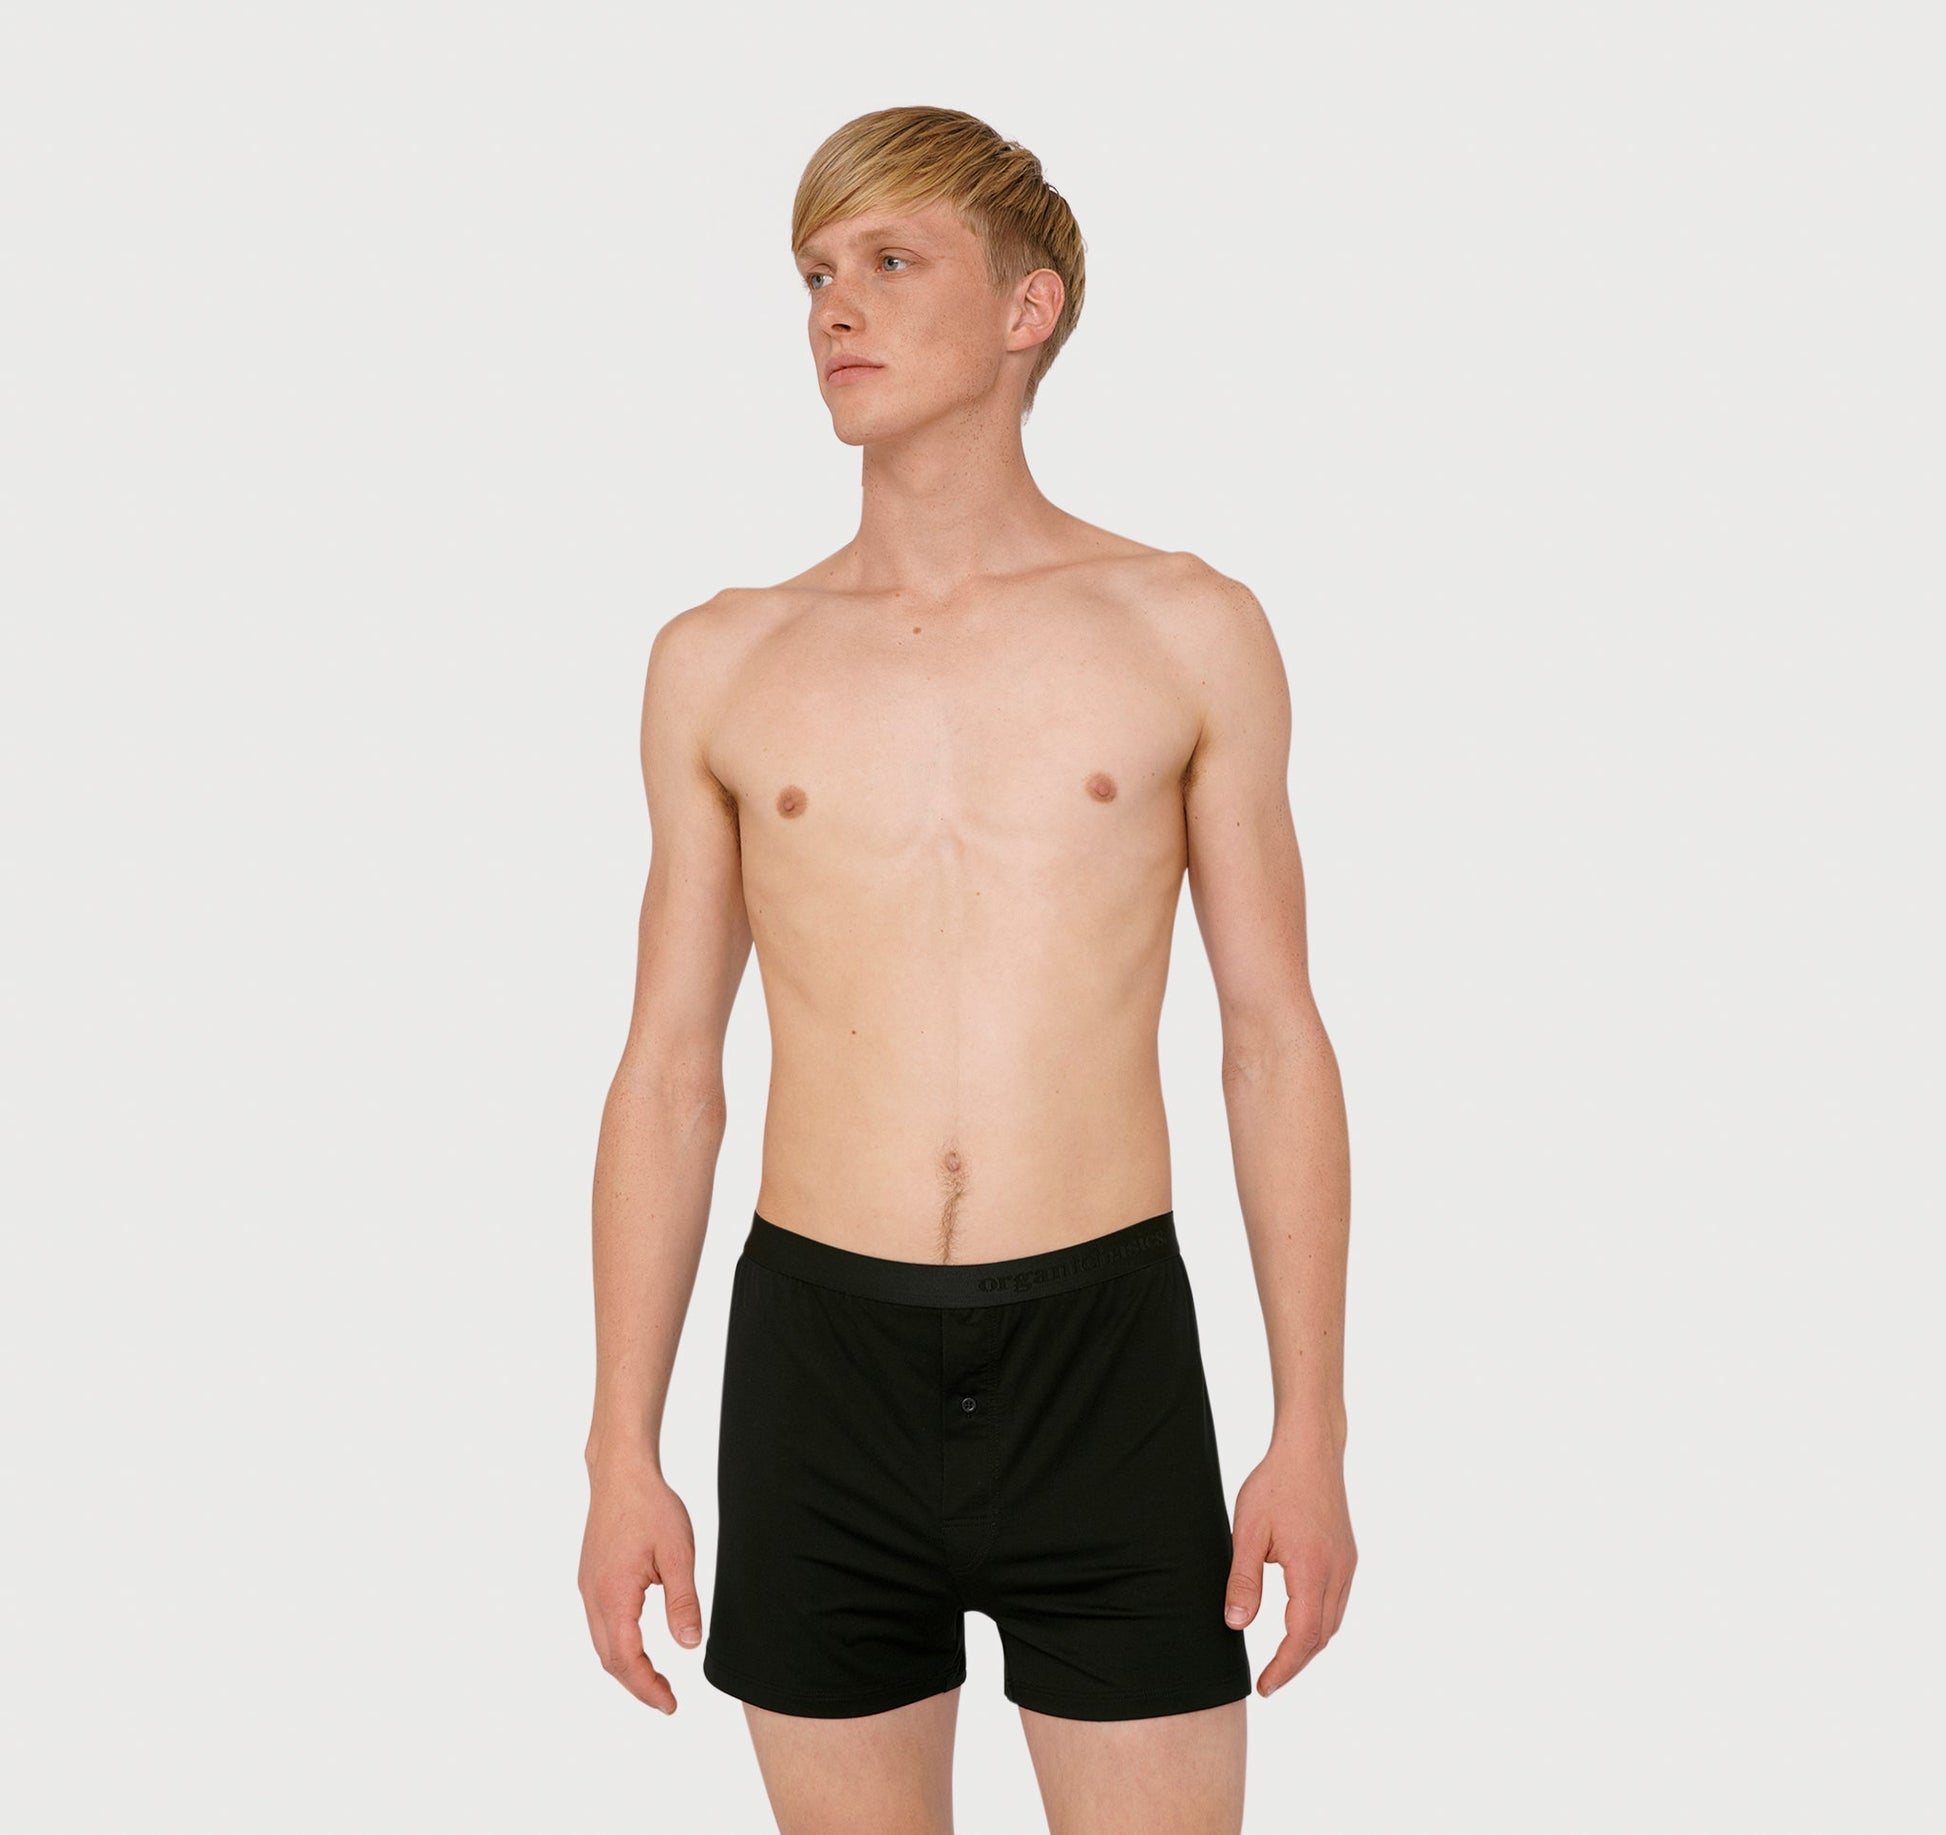 Where to Buy Wholesale Boxers in Nigeria - A Buyer's Guide